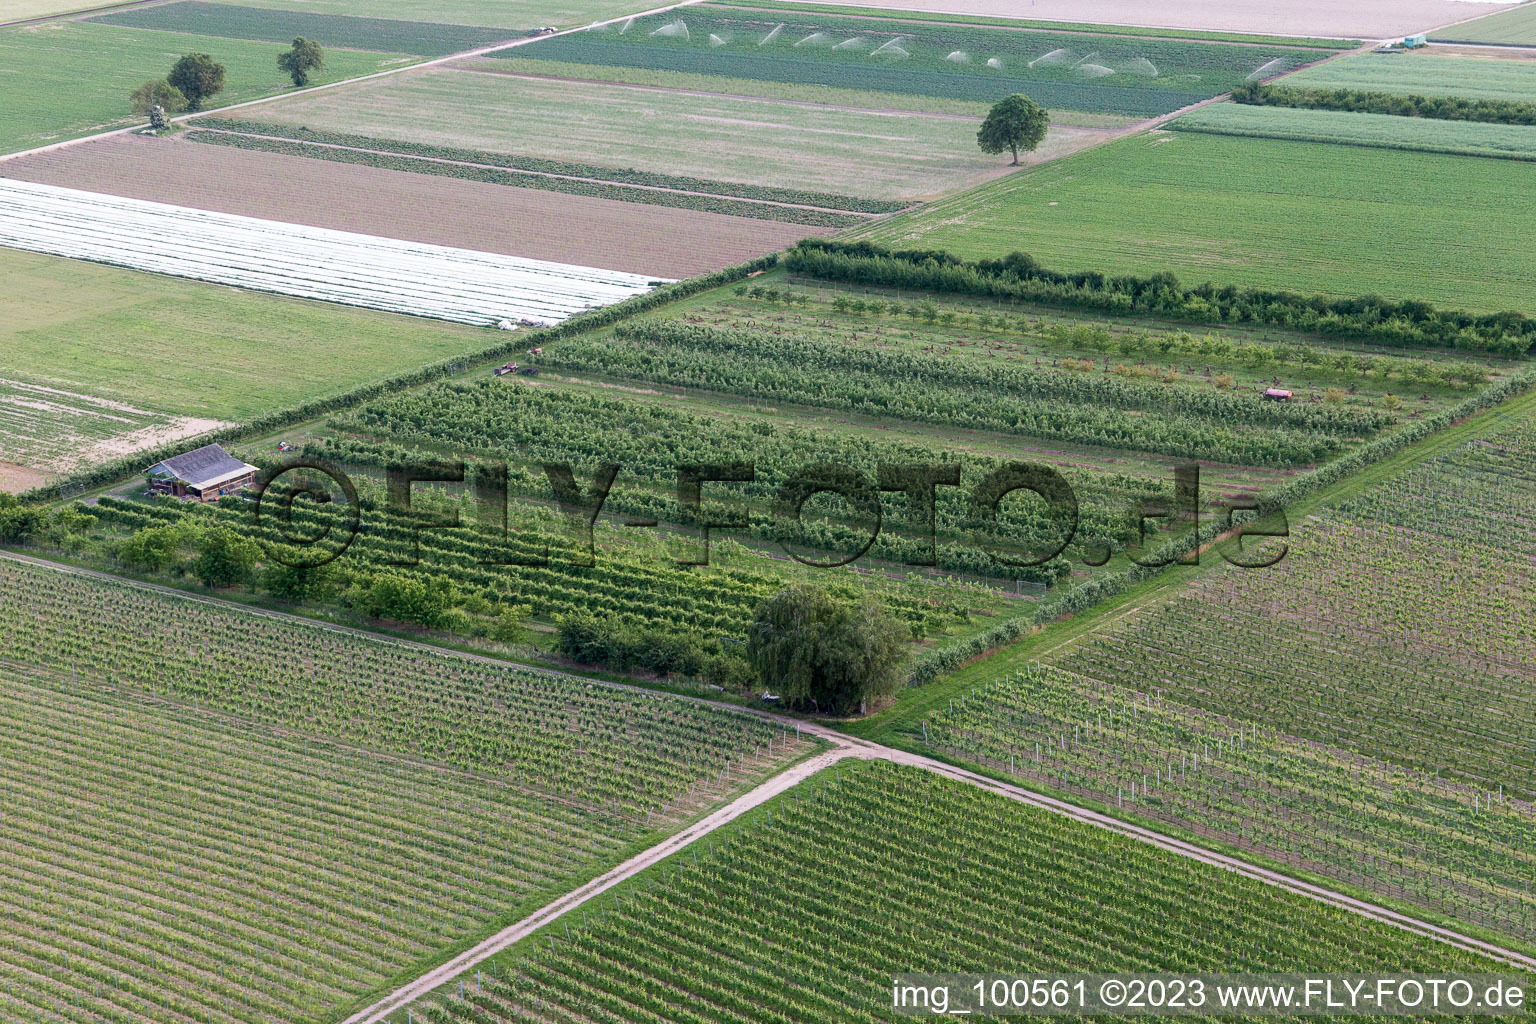 Aerial photograpy of Eier-Meier's orchard in Winden in the state Rhineland-Palatinate, Germany